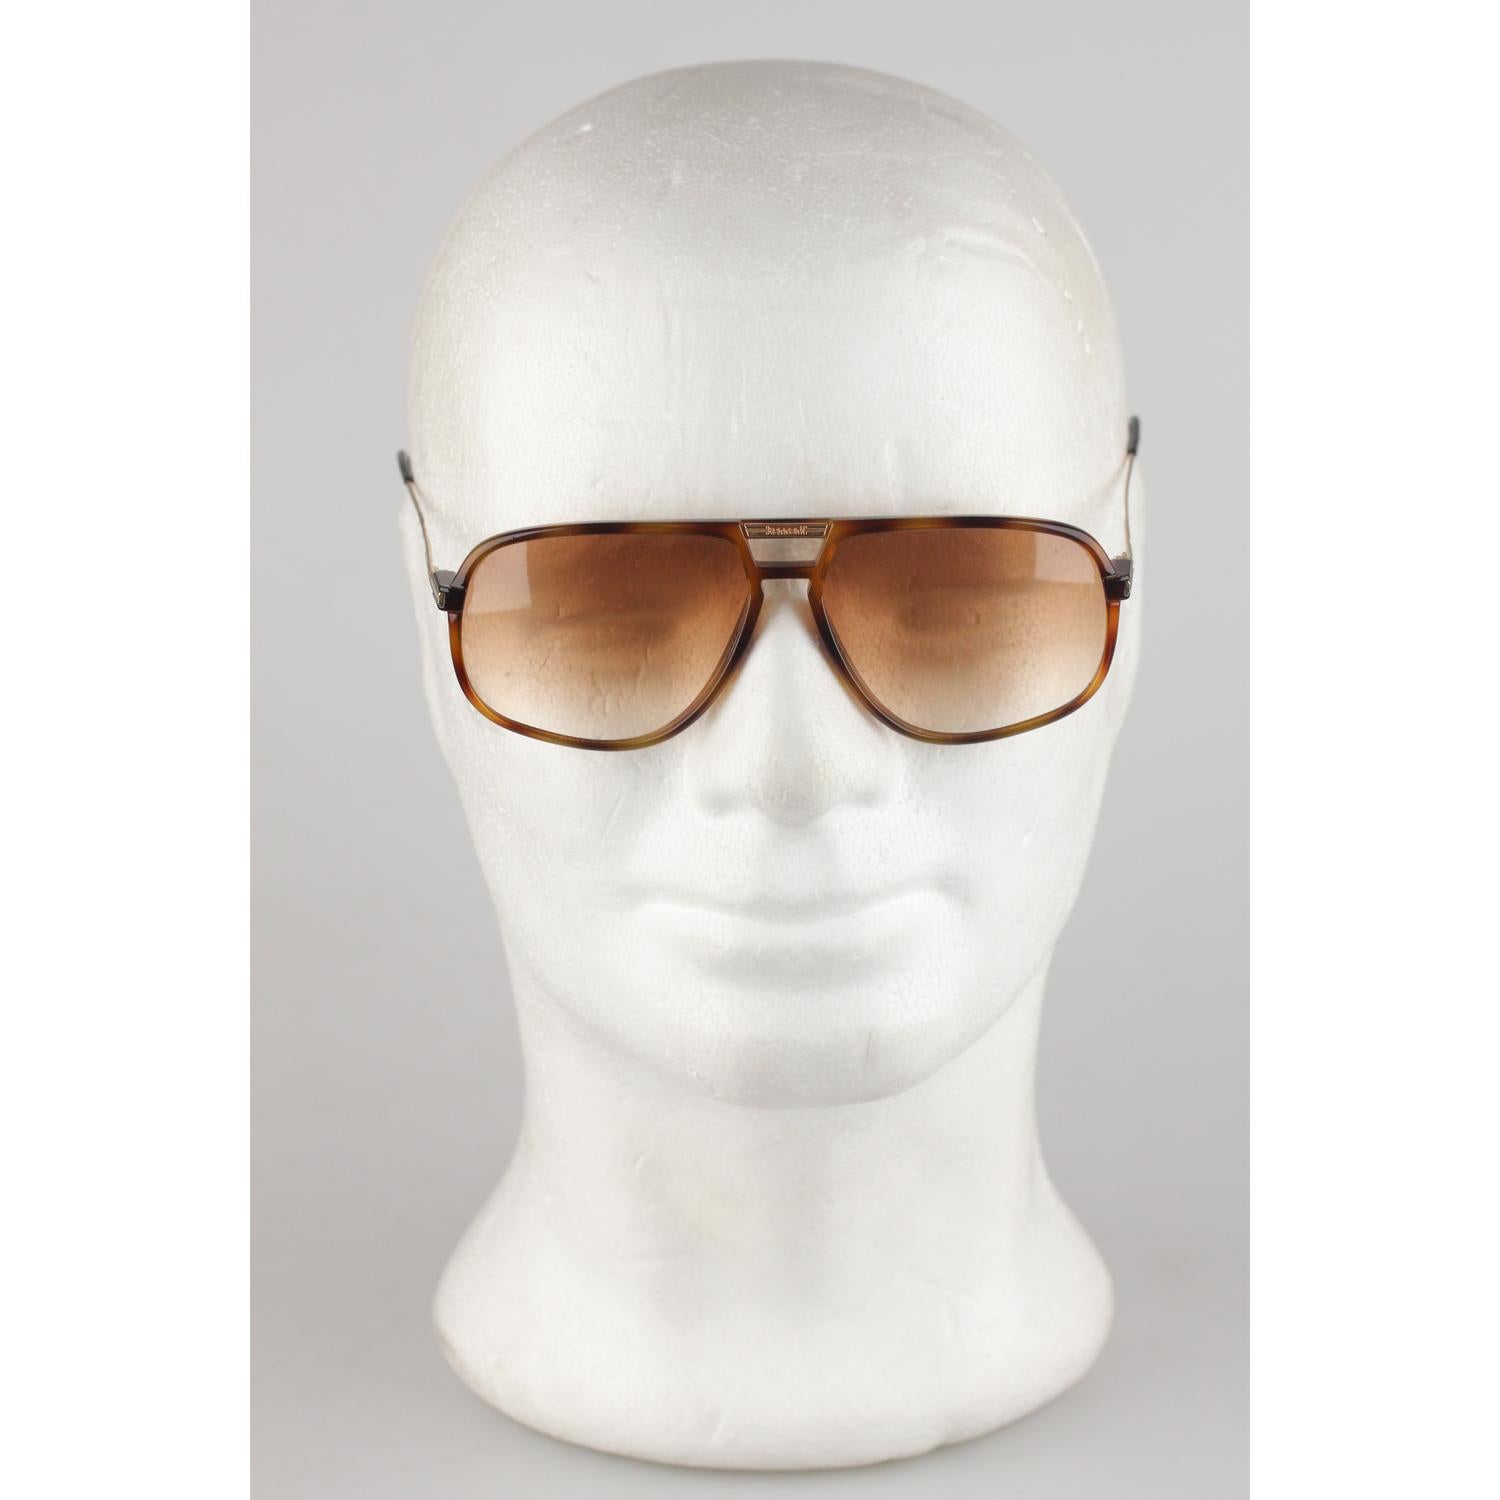 MATERIAL: Acetate,Metal

COLOR: Brown

MODEL: SOFYL F56

GENDER: Adult Unisex

SIZE: Large

COUNTRY OF MANUFACTURE: Italy

Condition
CONDITION DETAILS:

MINT CONDITION - No visible wear - NEW 100% total UV protection lenses. They will come with a